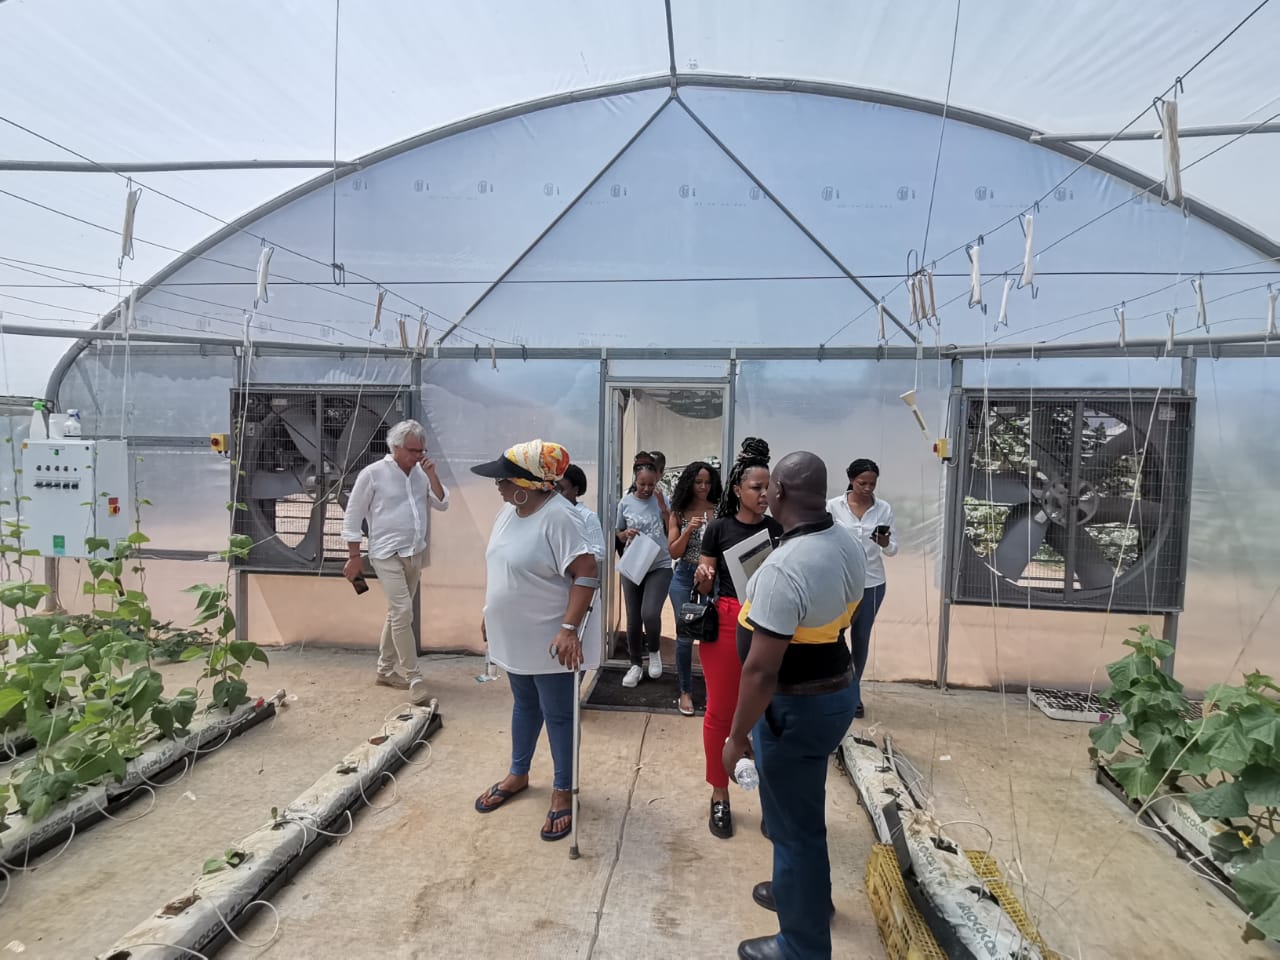 The greenhouse visit